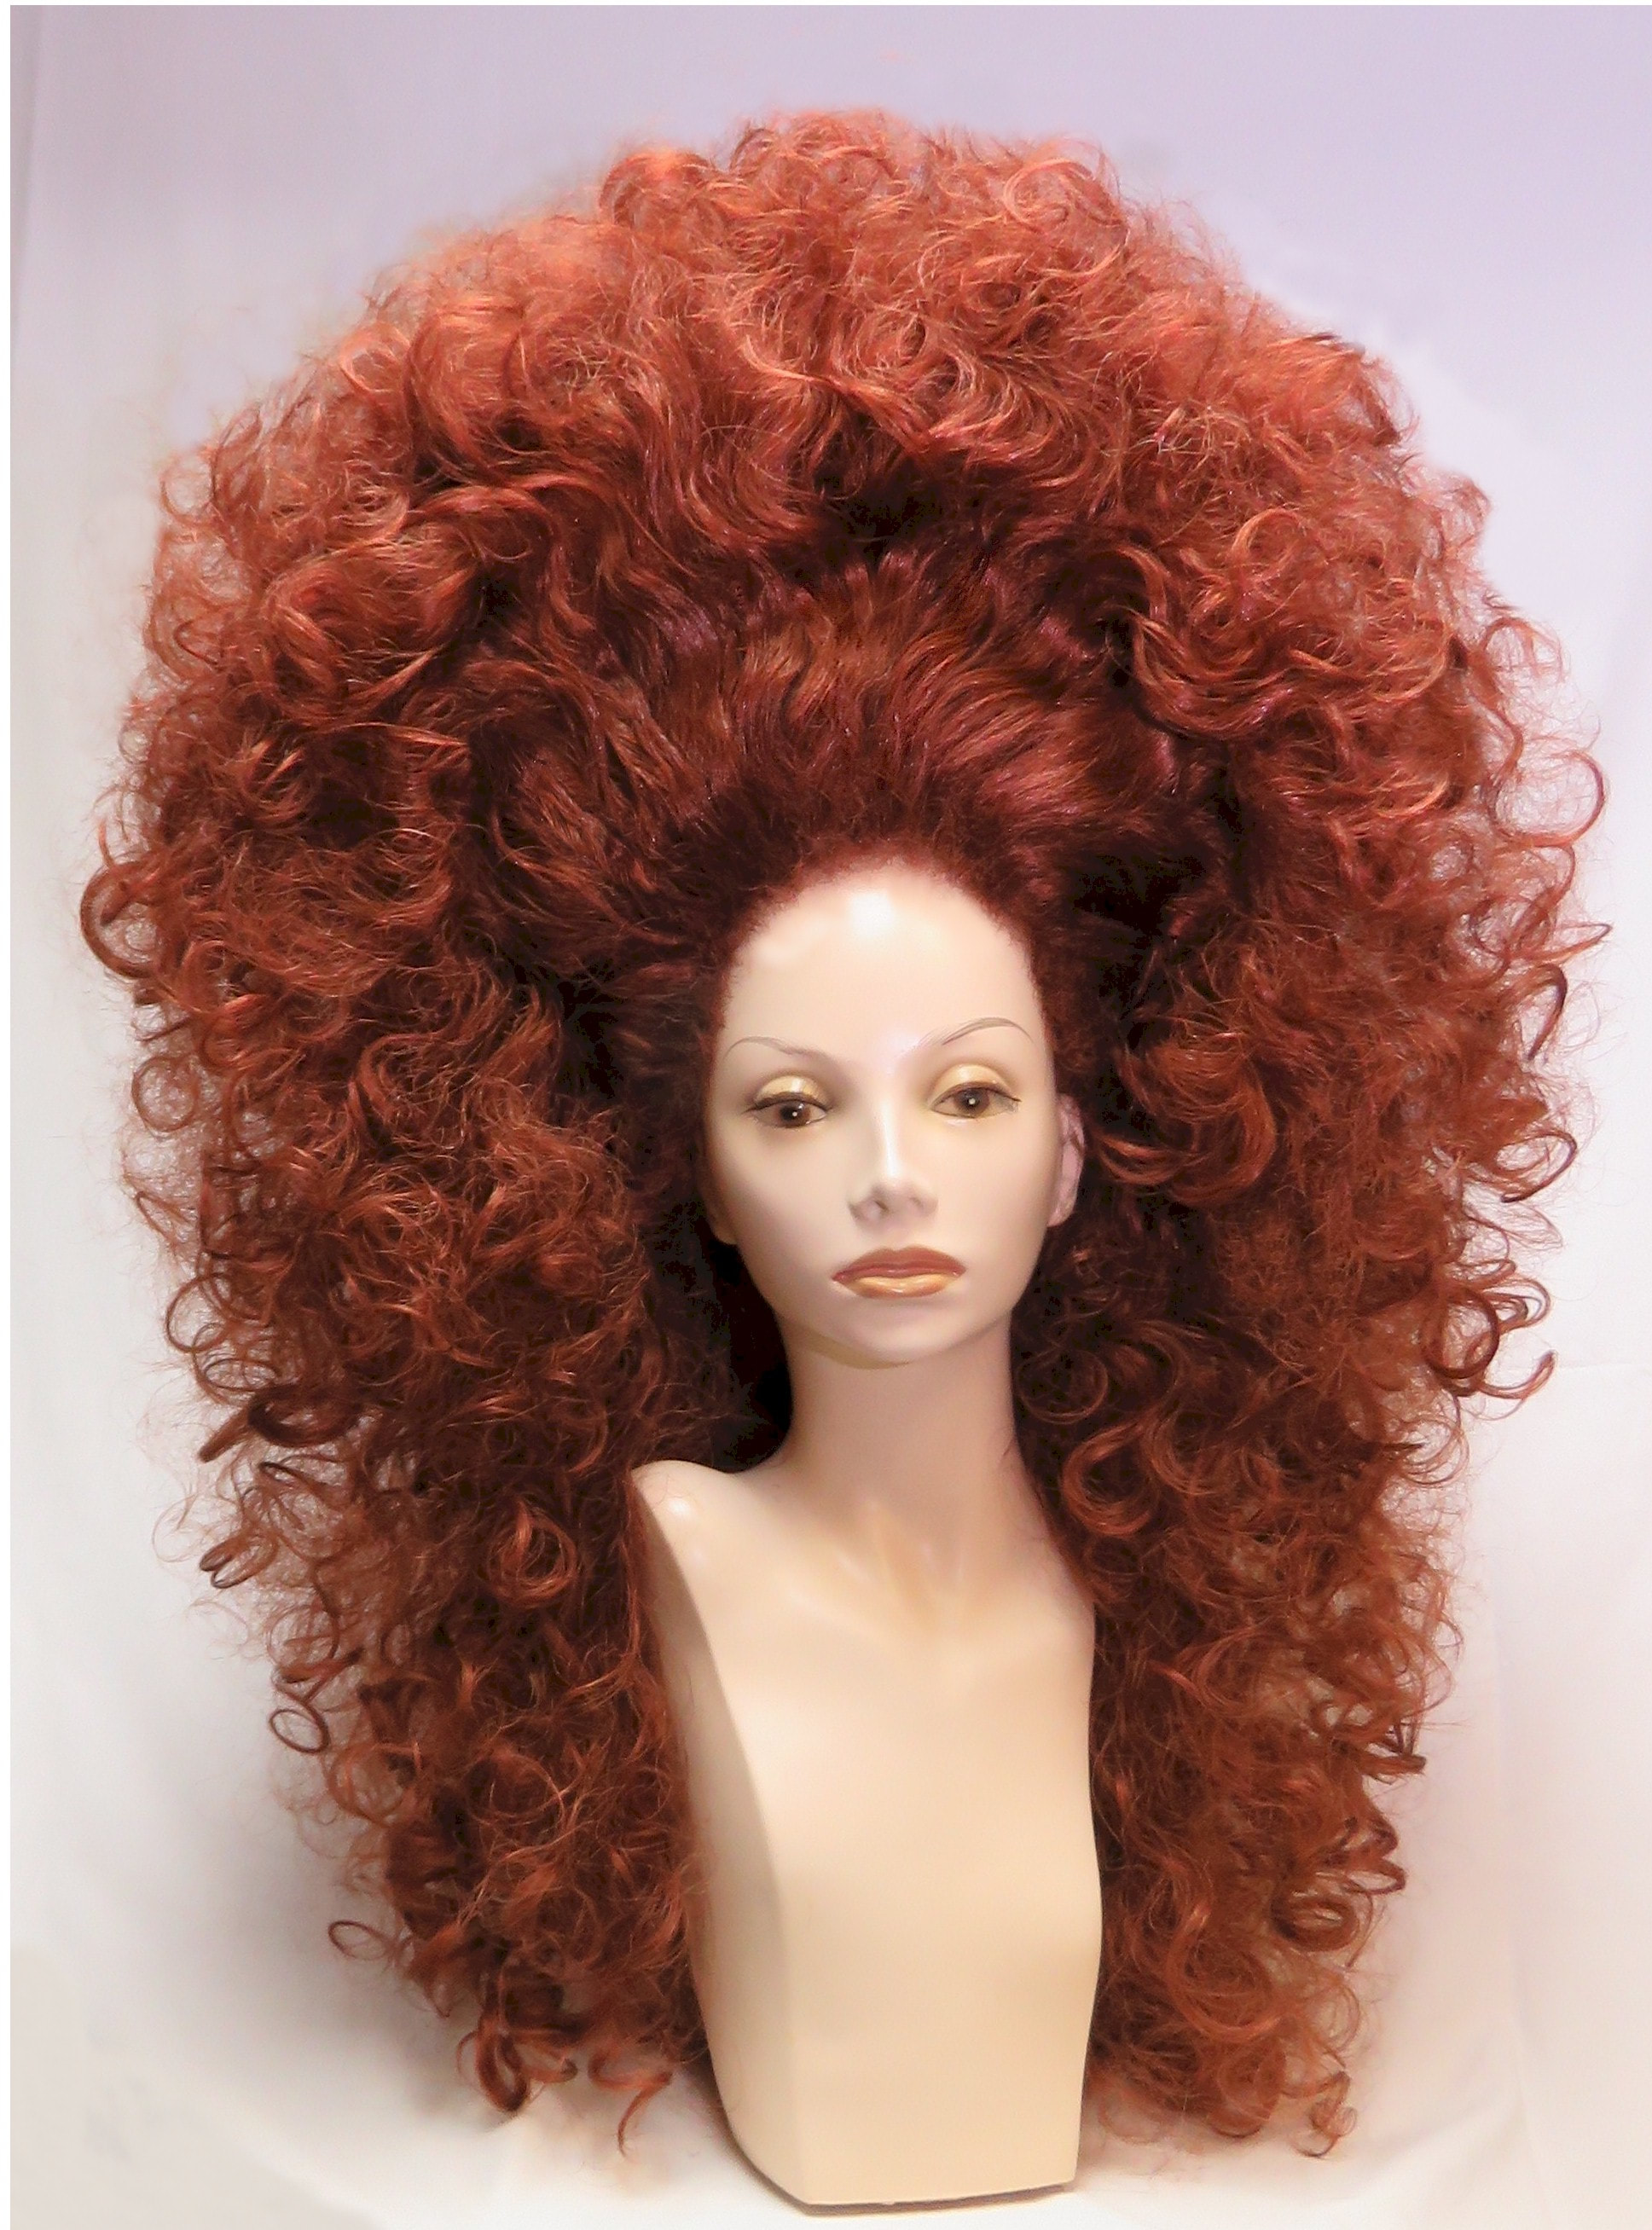 Custom Made Huge Double Curly Drag Queen Theatrical Wig At A K Wig